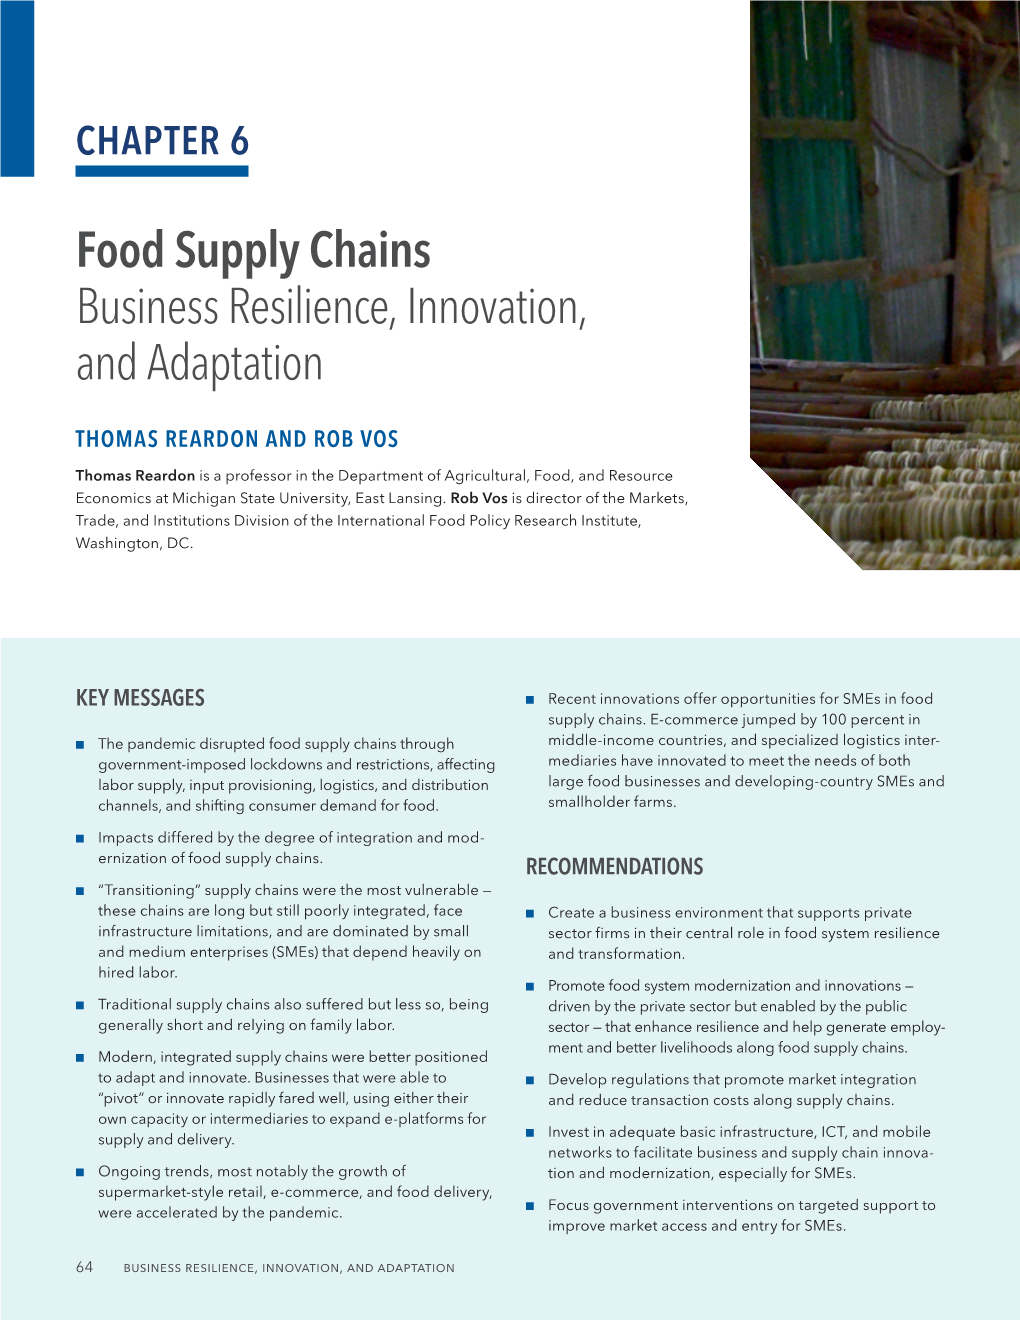 Food Supply Chains Business Resilience, Innovation, and Adaptation